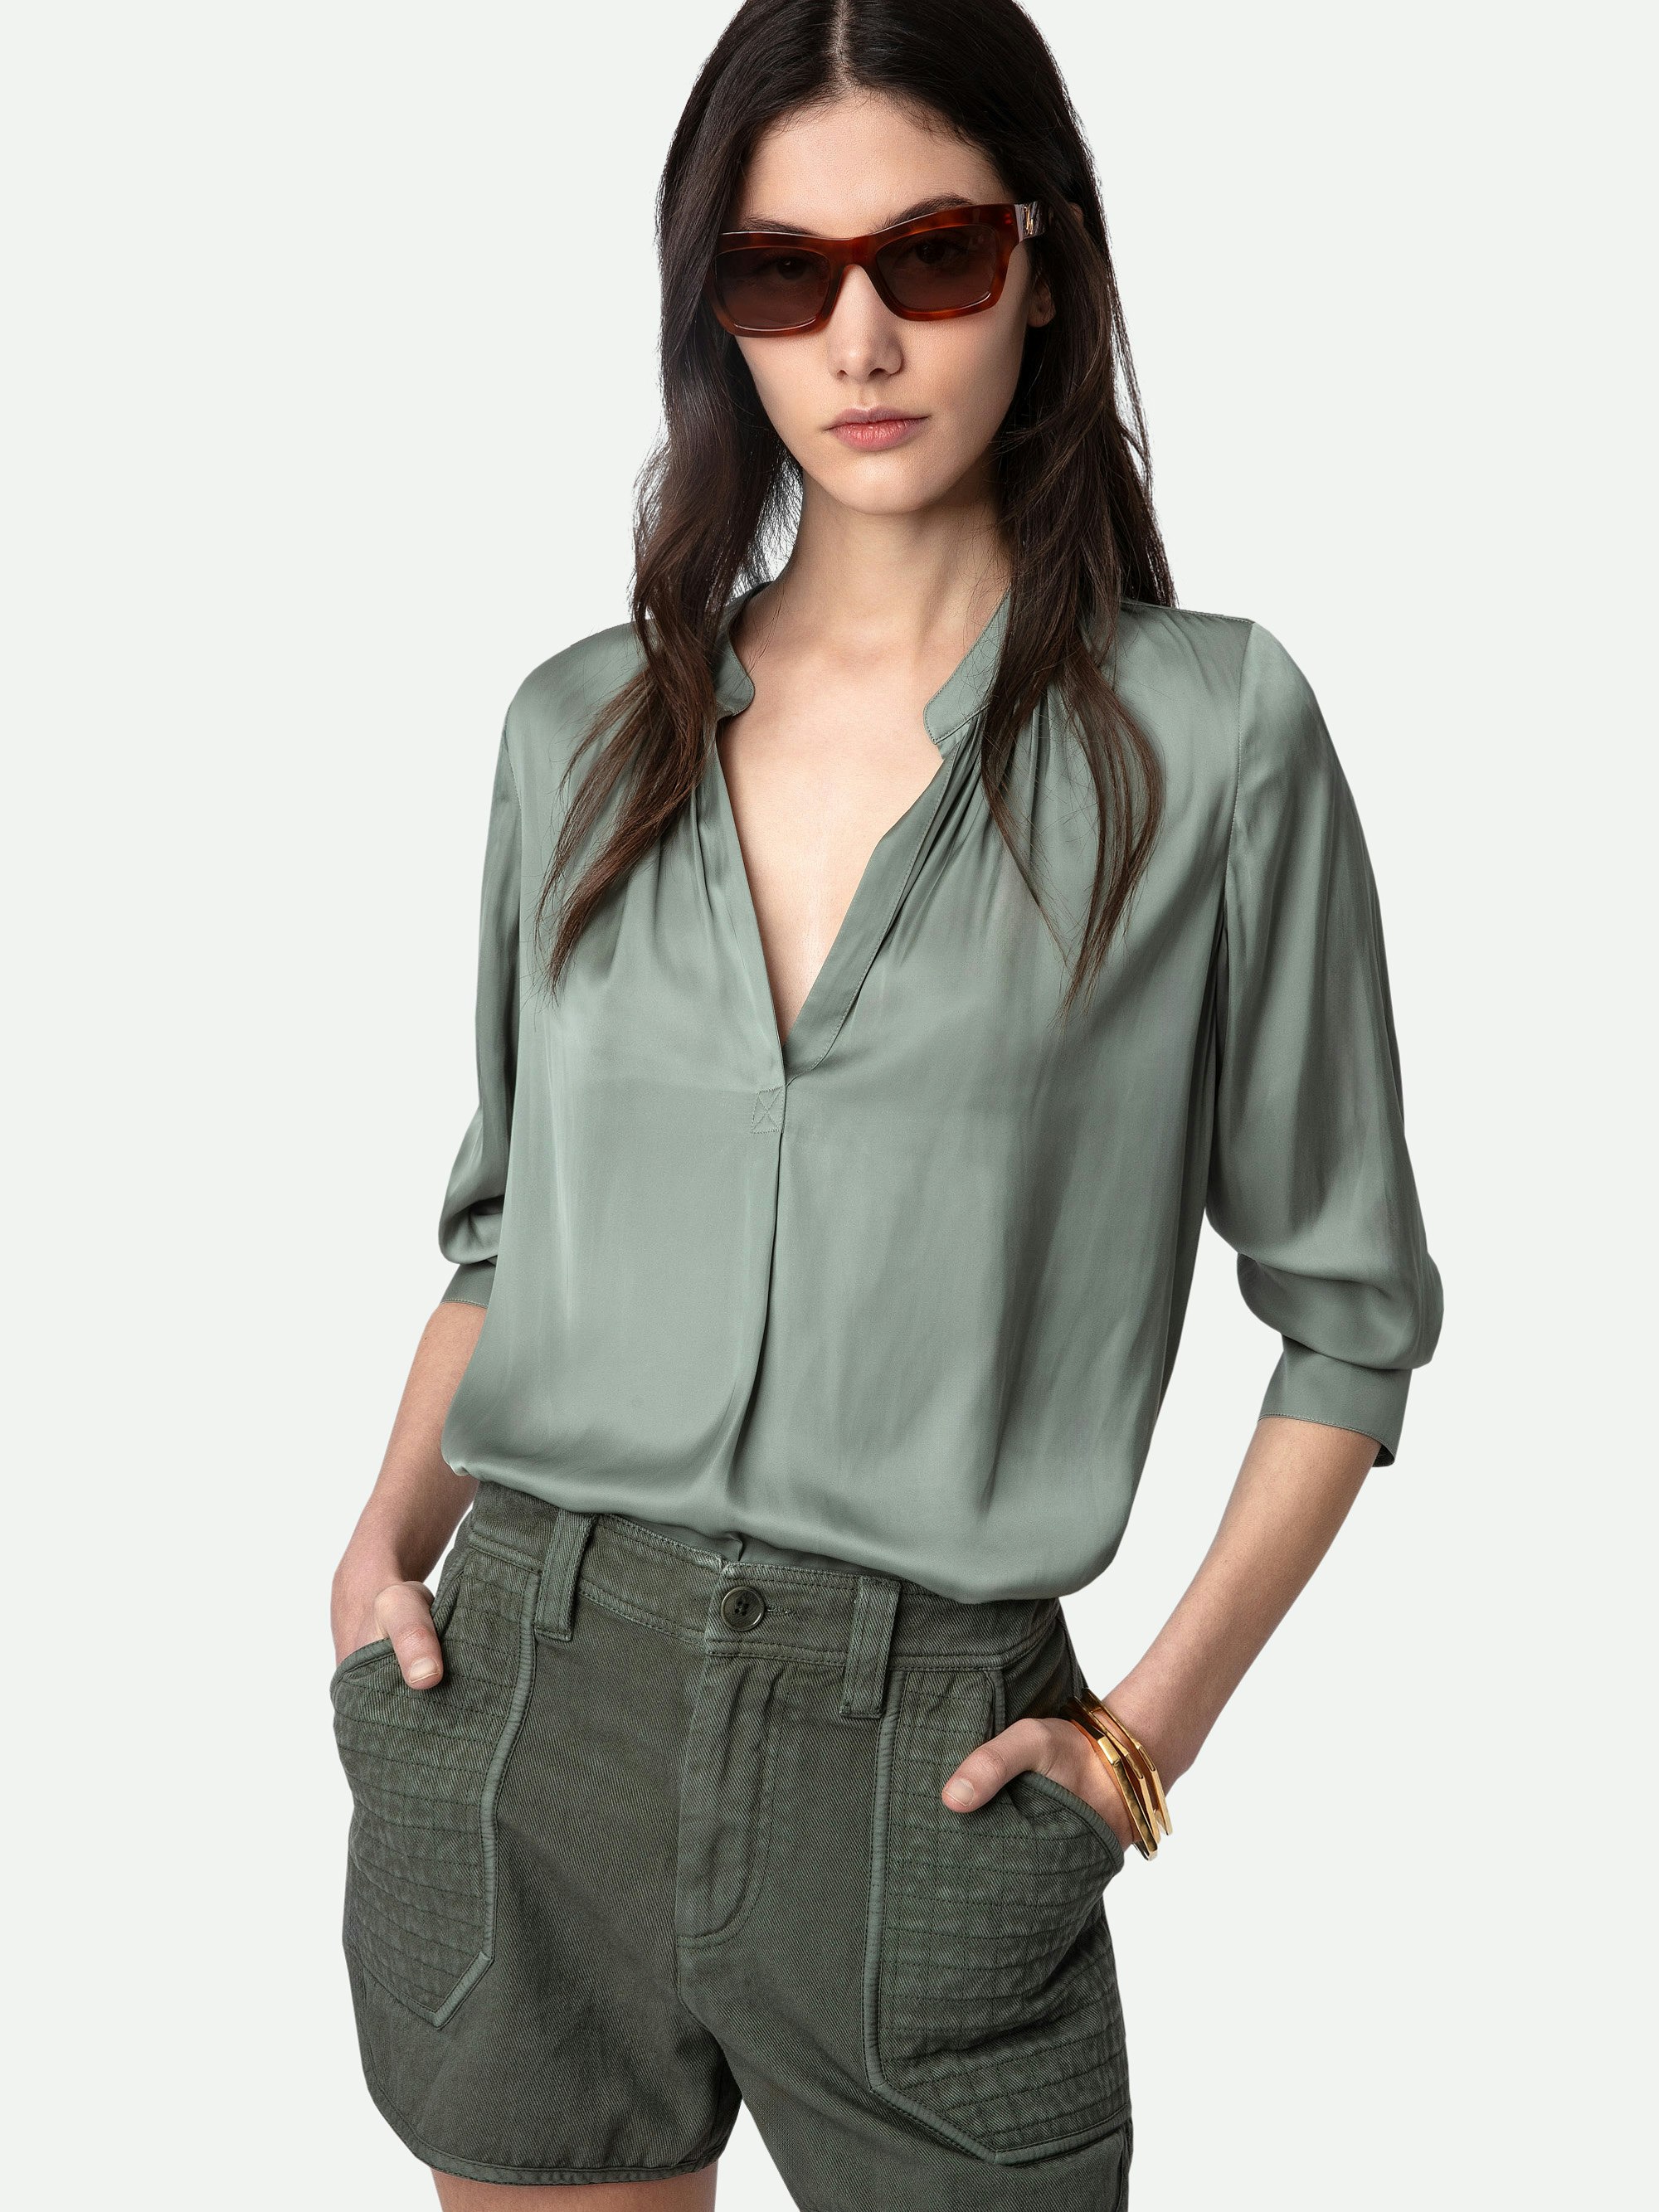 Tink Satin Blouse - Grey satin blouse with open collar, long sleeves and gathered details.